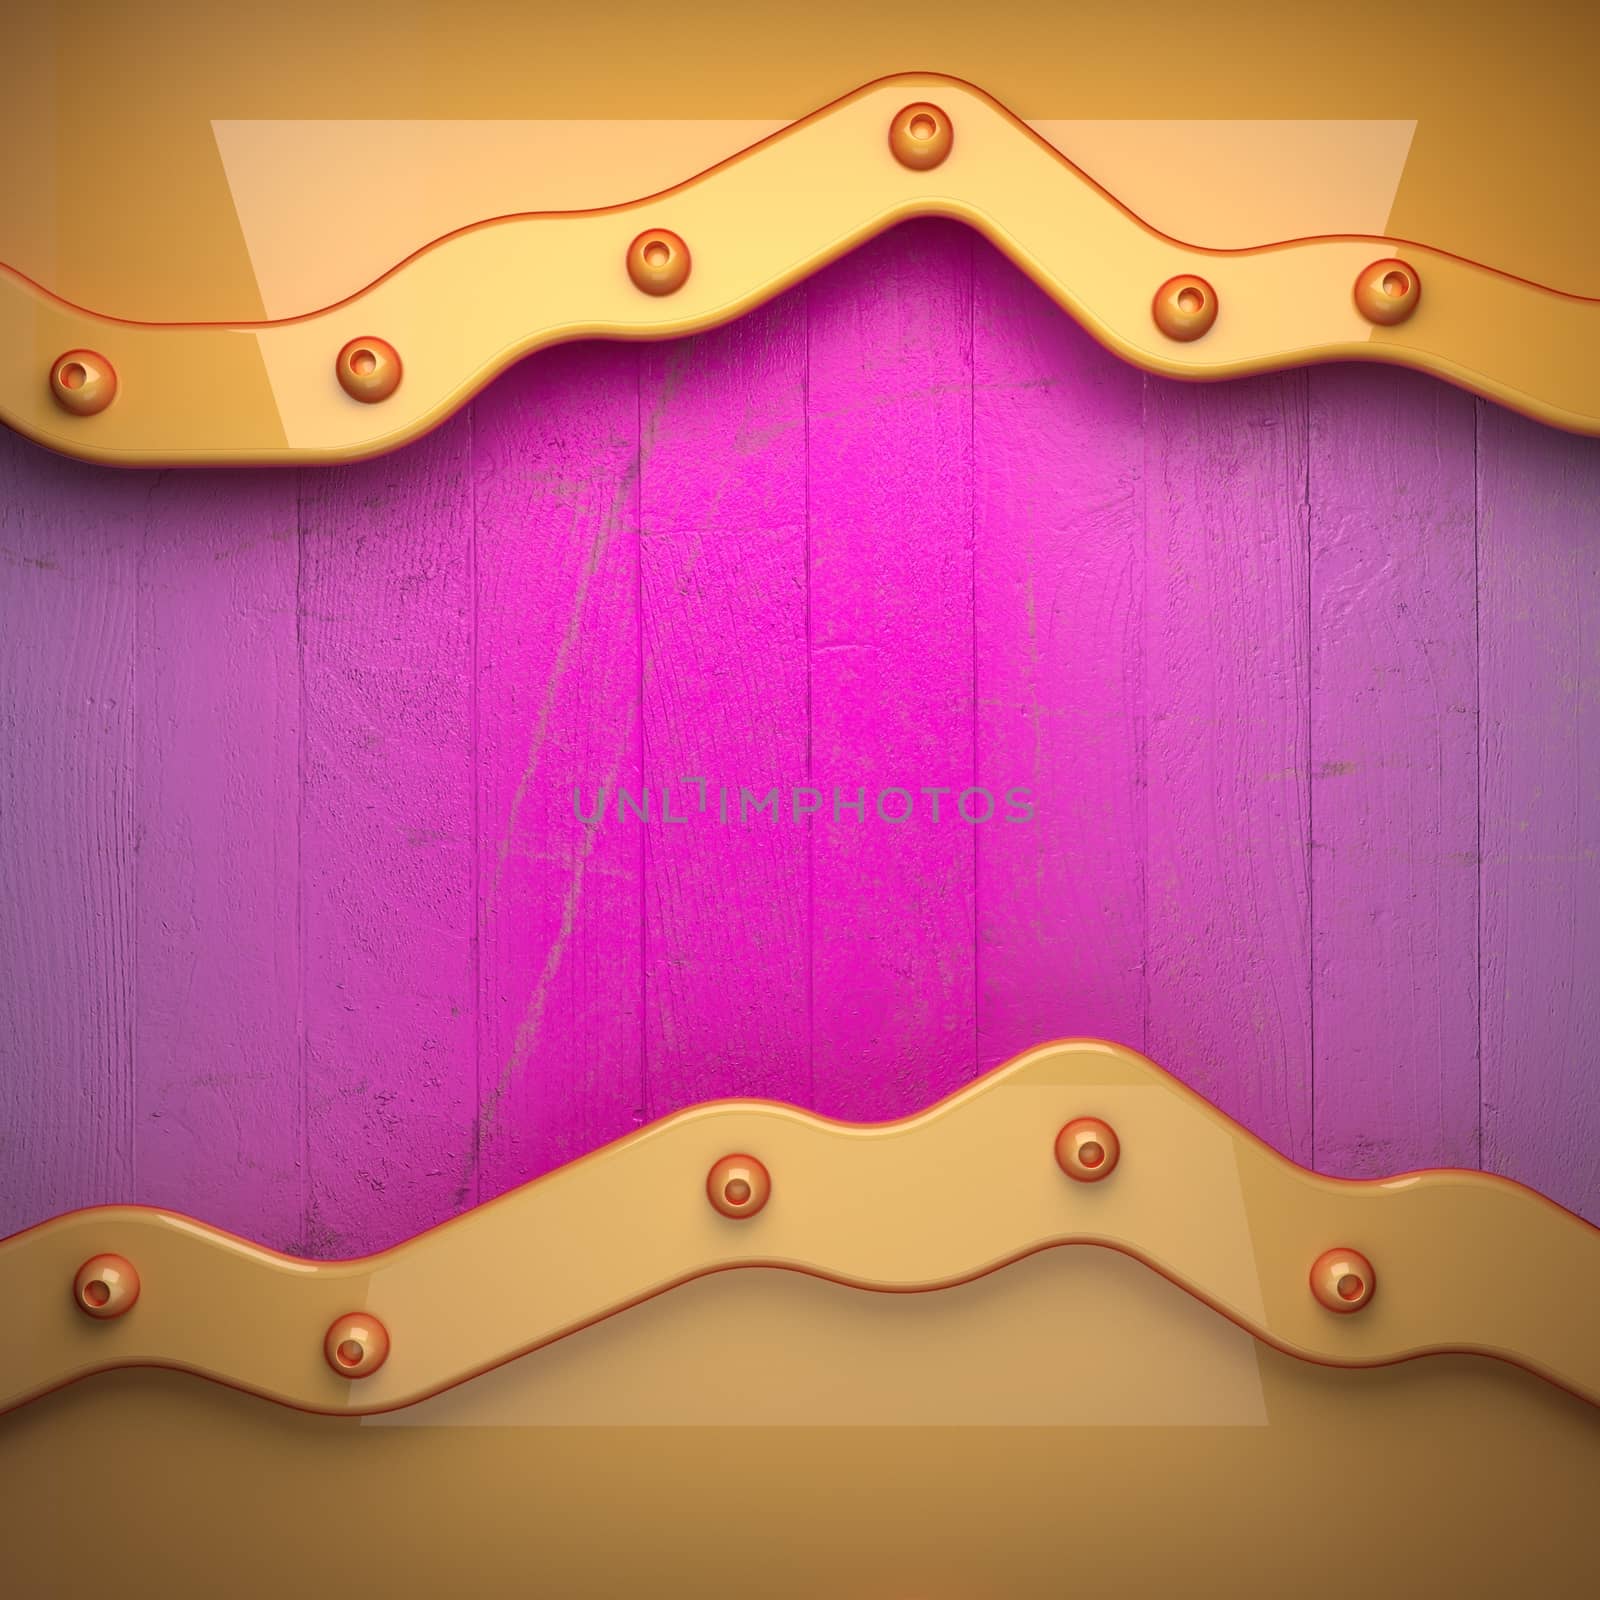 yellow metal and pink wood background